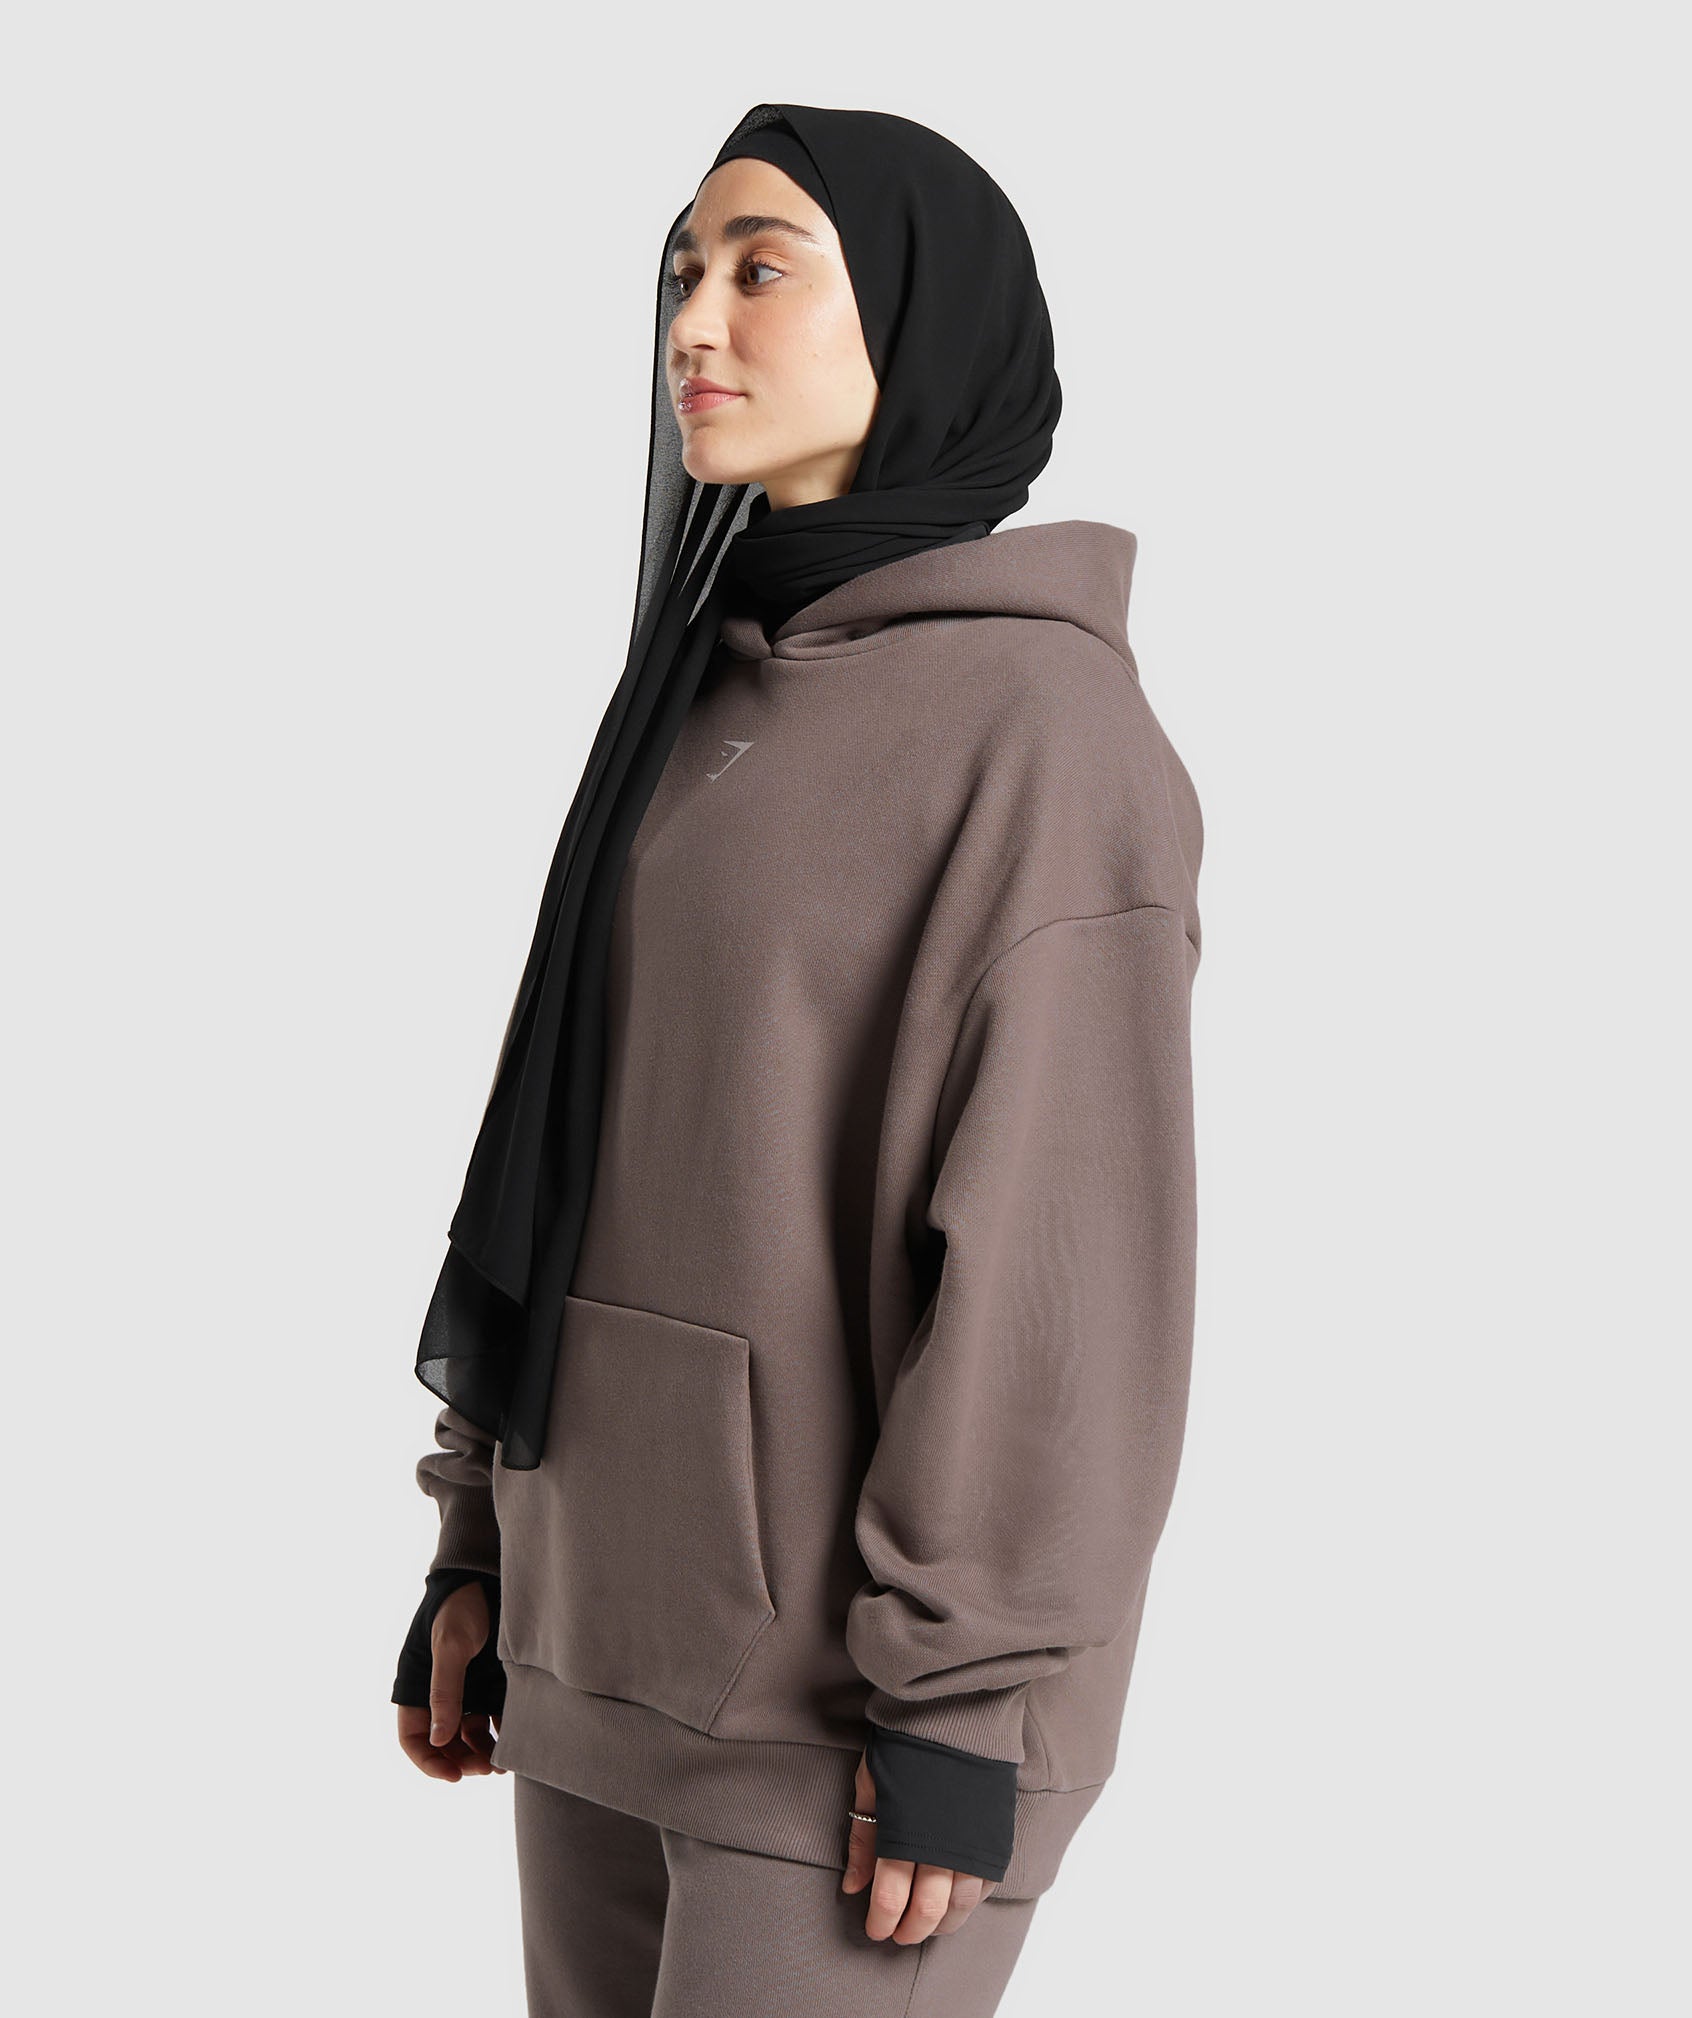 GS X Leana Deeb Oversized Graphic Hoodie in Dusty Brown - view 3